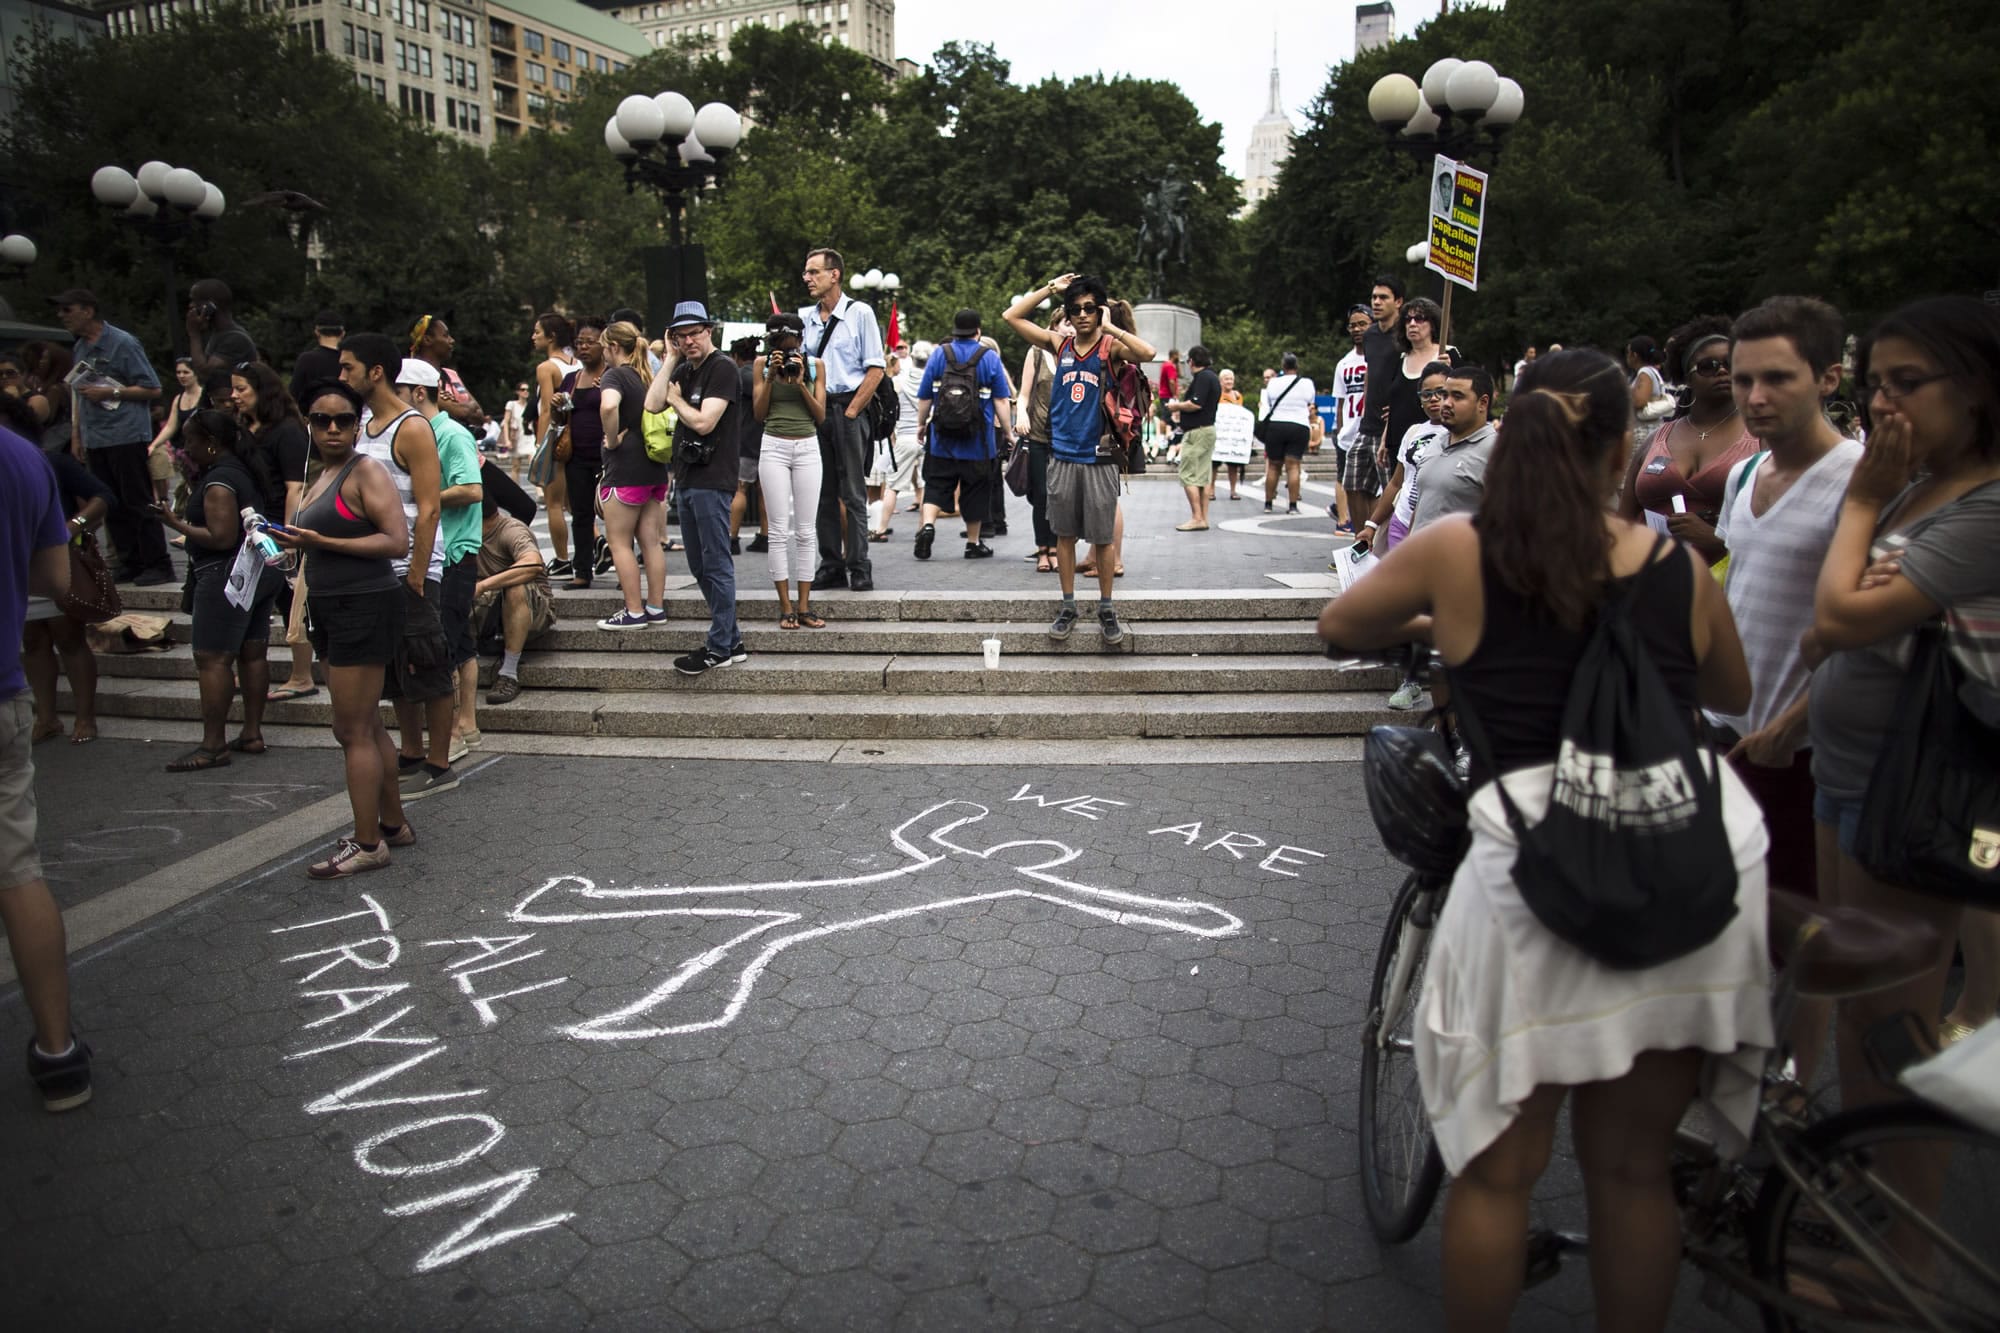 Protestors converge on Union Square on Sunday in New York, for a protest against the acquittal of volunteer neighborhood watch member George Zimmerman in the 2012 killing of 17-year-old Trayvon Martin in Sanford, Fla.